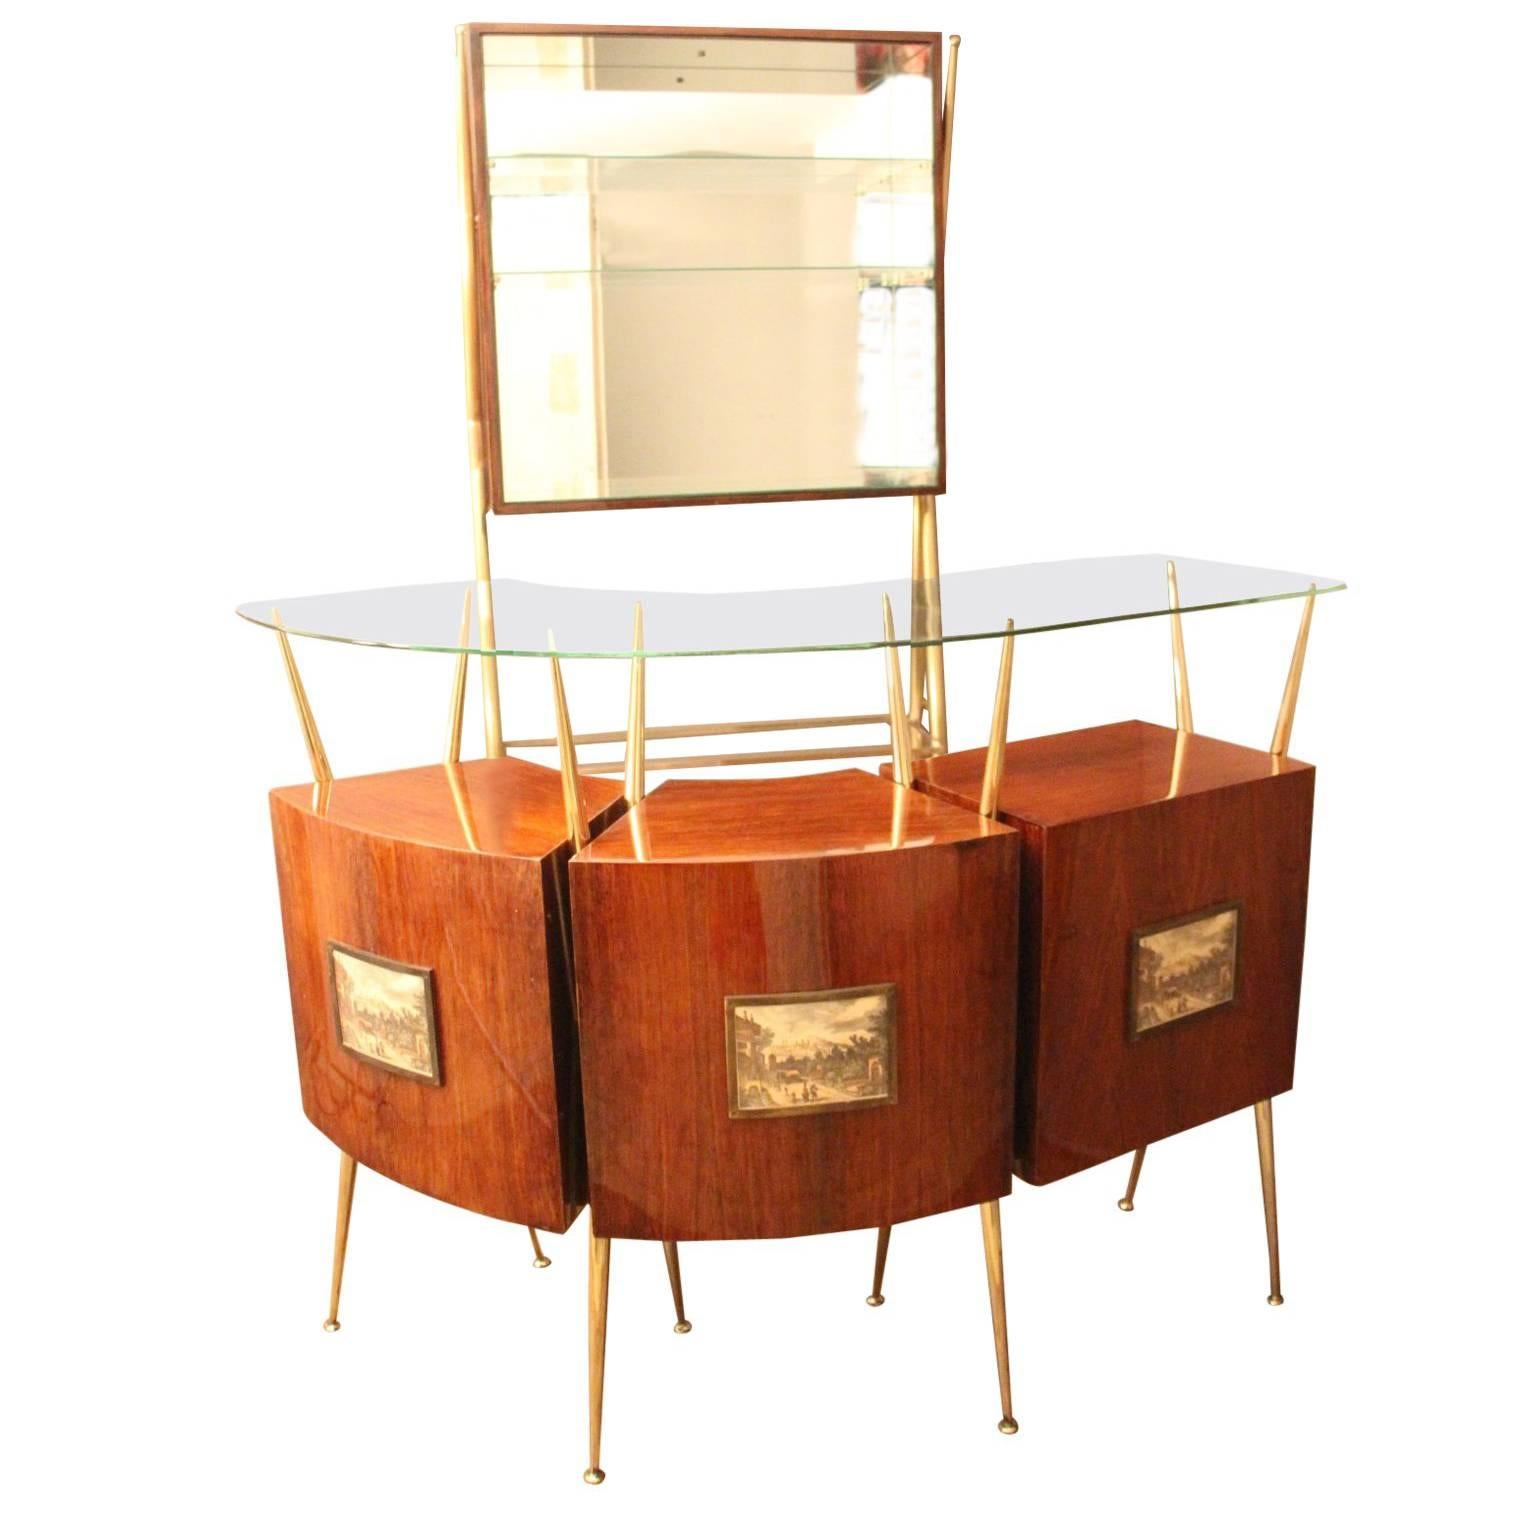 Midcentury Italian Dry Bar Cabinet in the Style of Gio Ponti